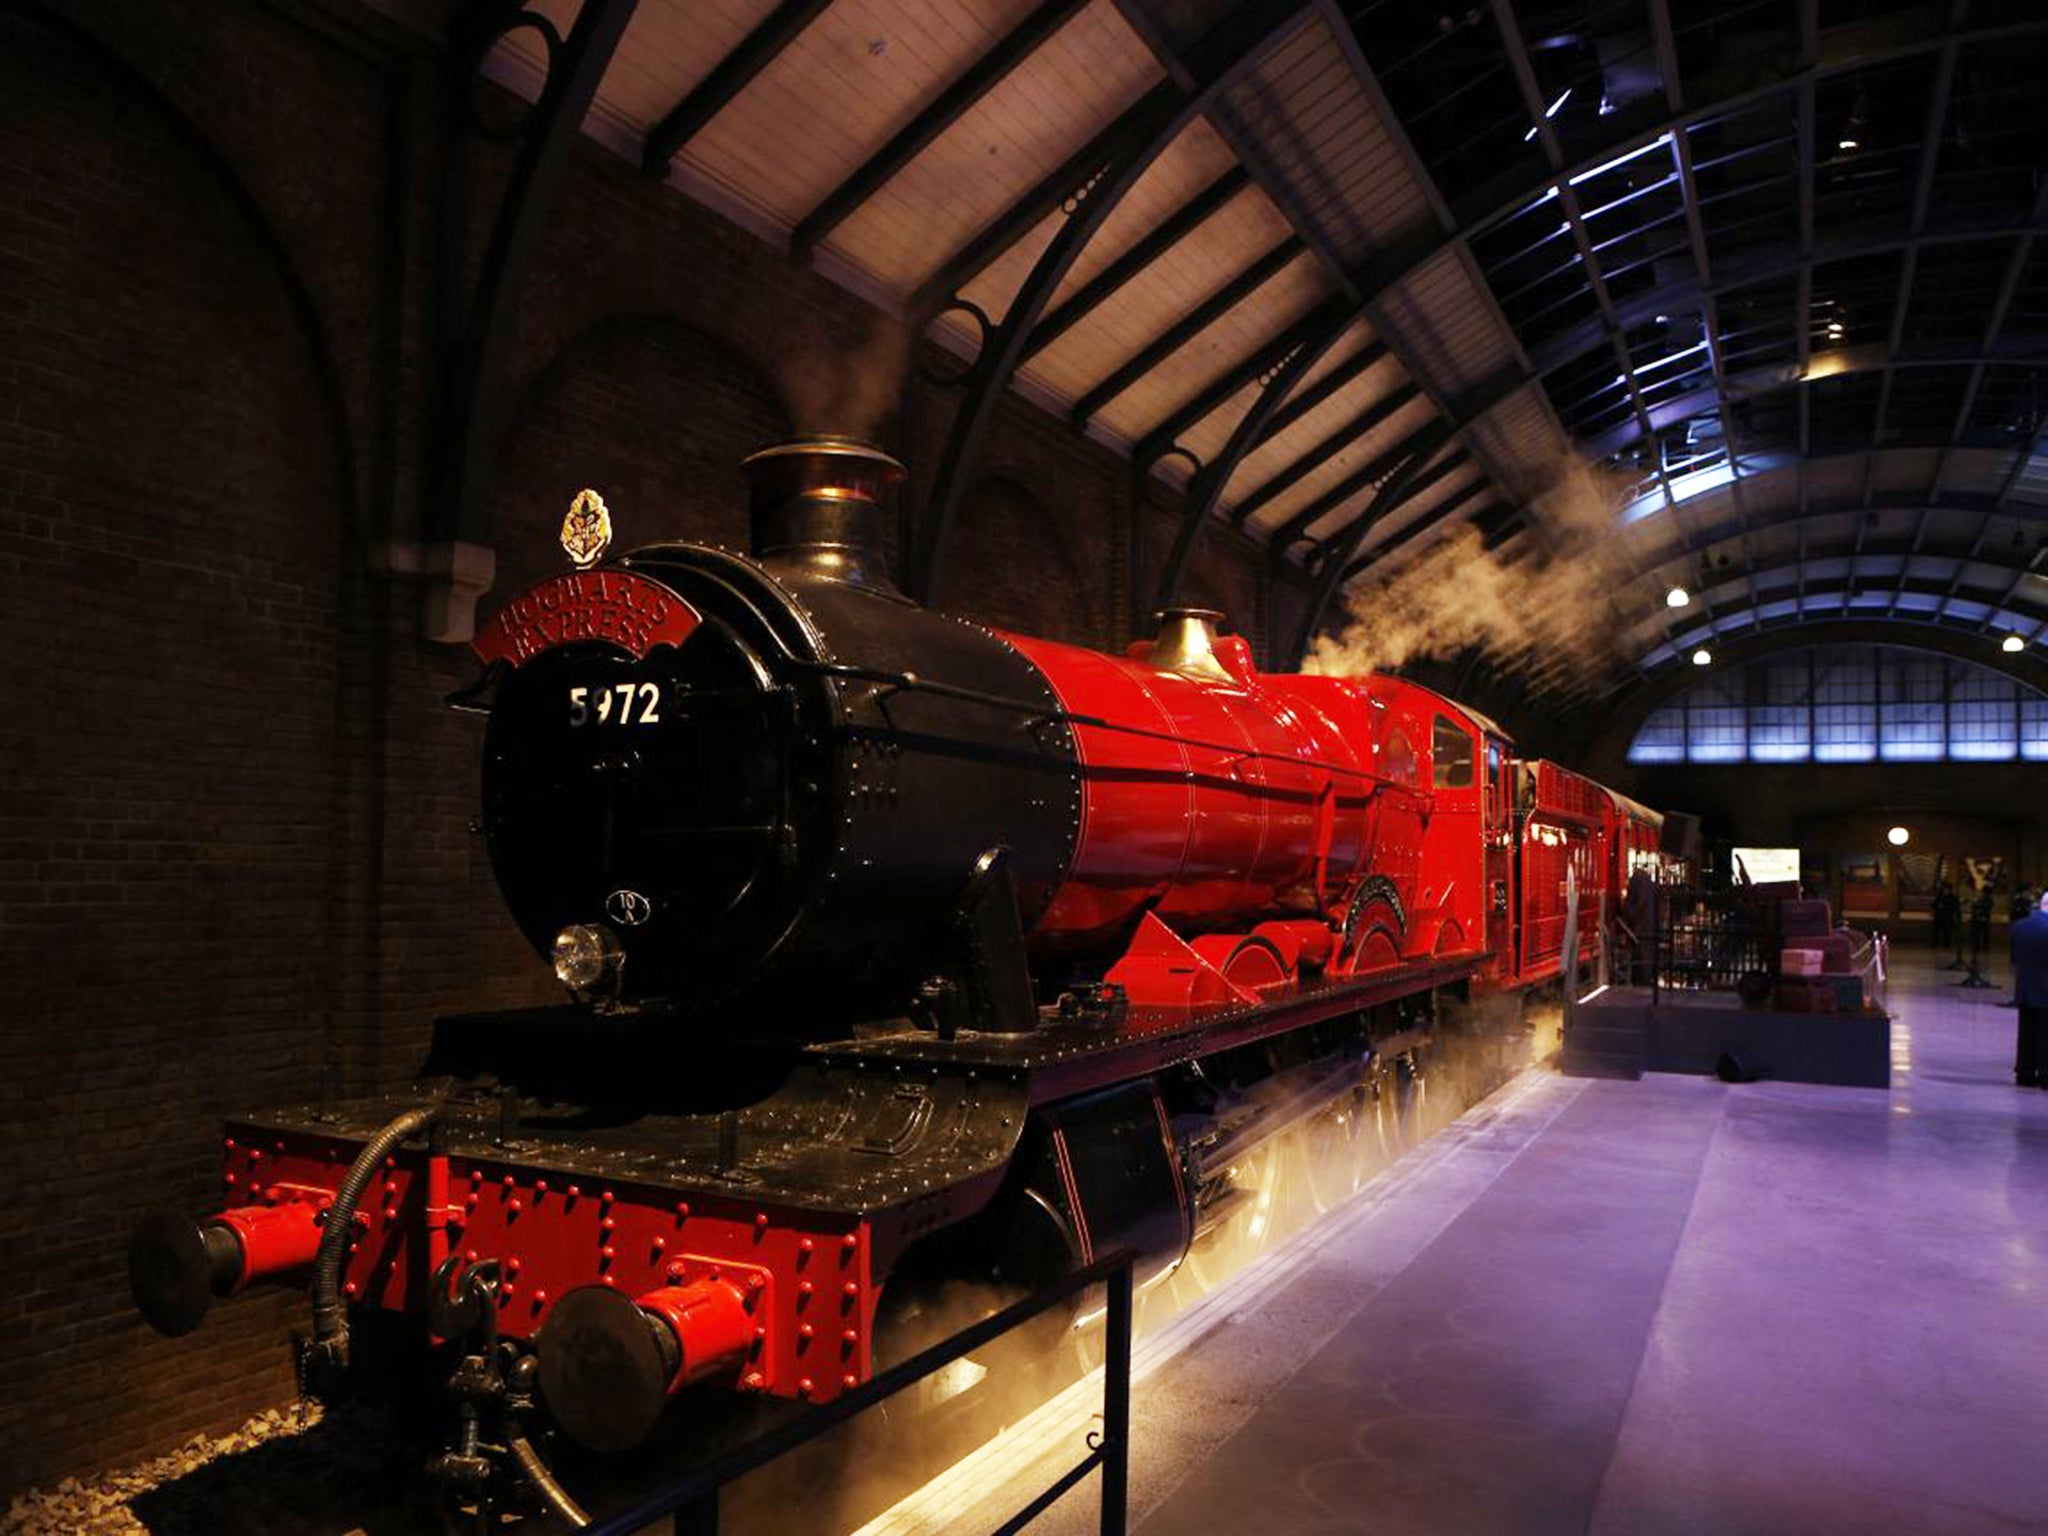 The Hogwart’s Express takes young witches and wizards to Hogwarts in the Harry Potter books